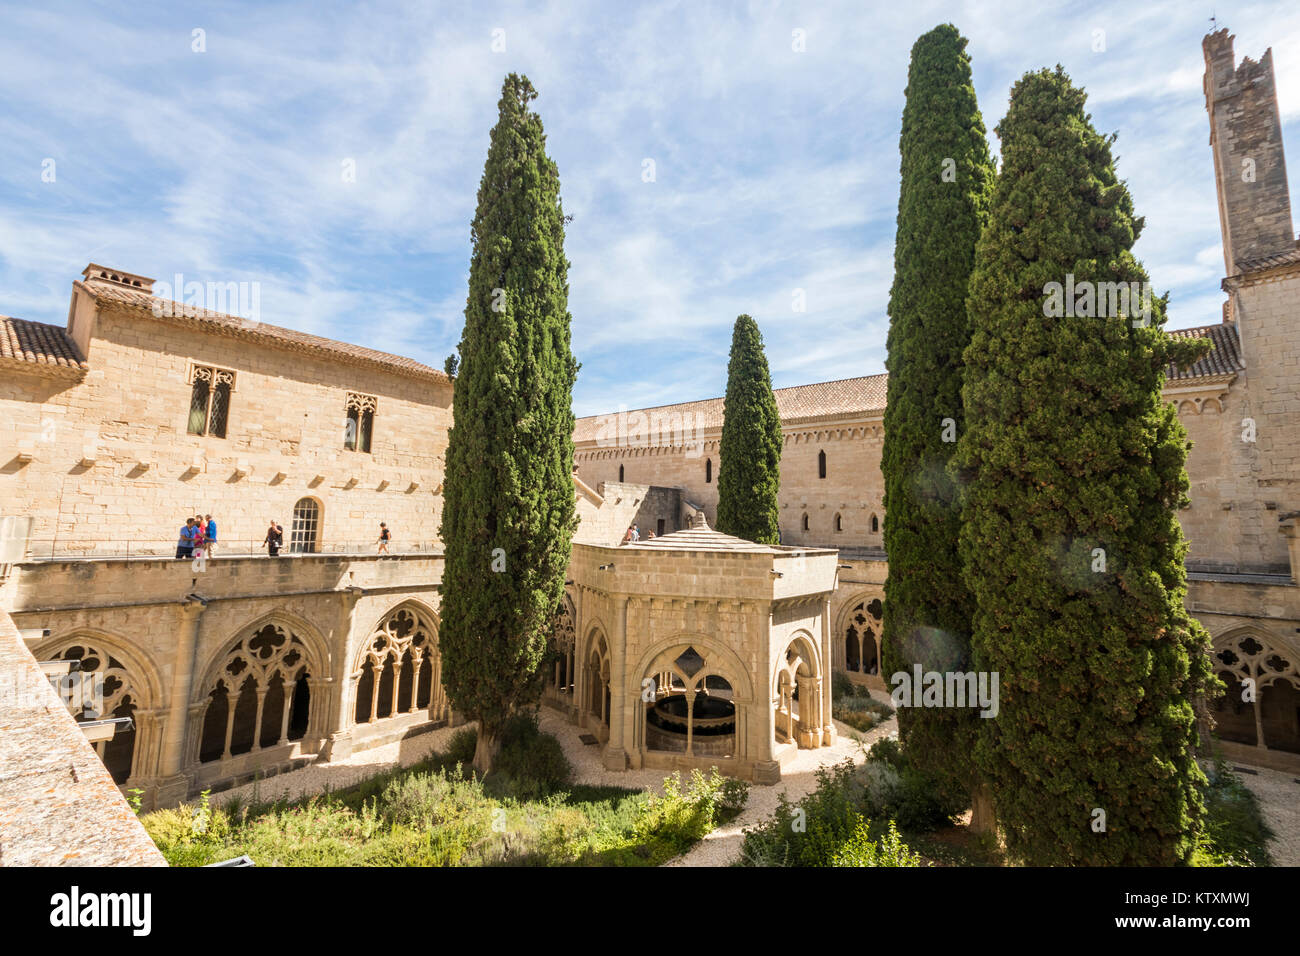 The cloister of the Royal Abbey of Santa Maria de Poblet, a Cistercian monastery in Catalonia, Spain, pantheon of the kings of the Crown of Aragon Stock Photo